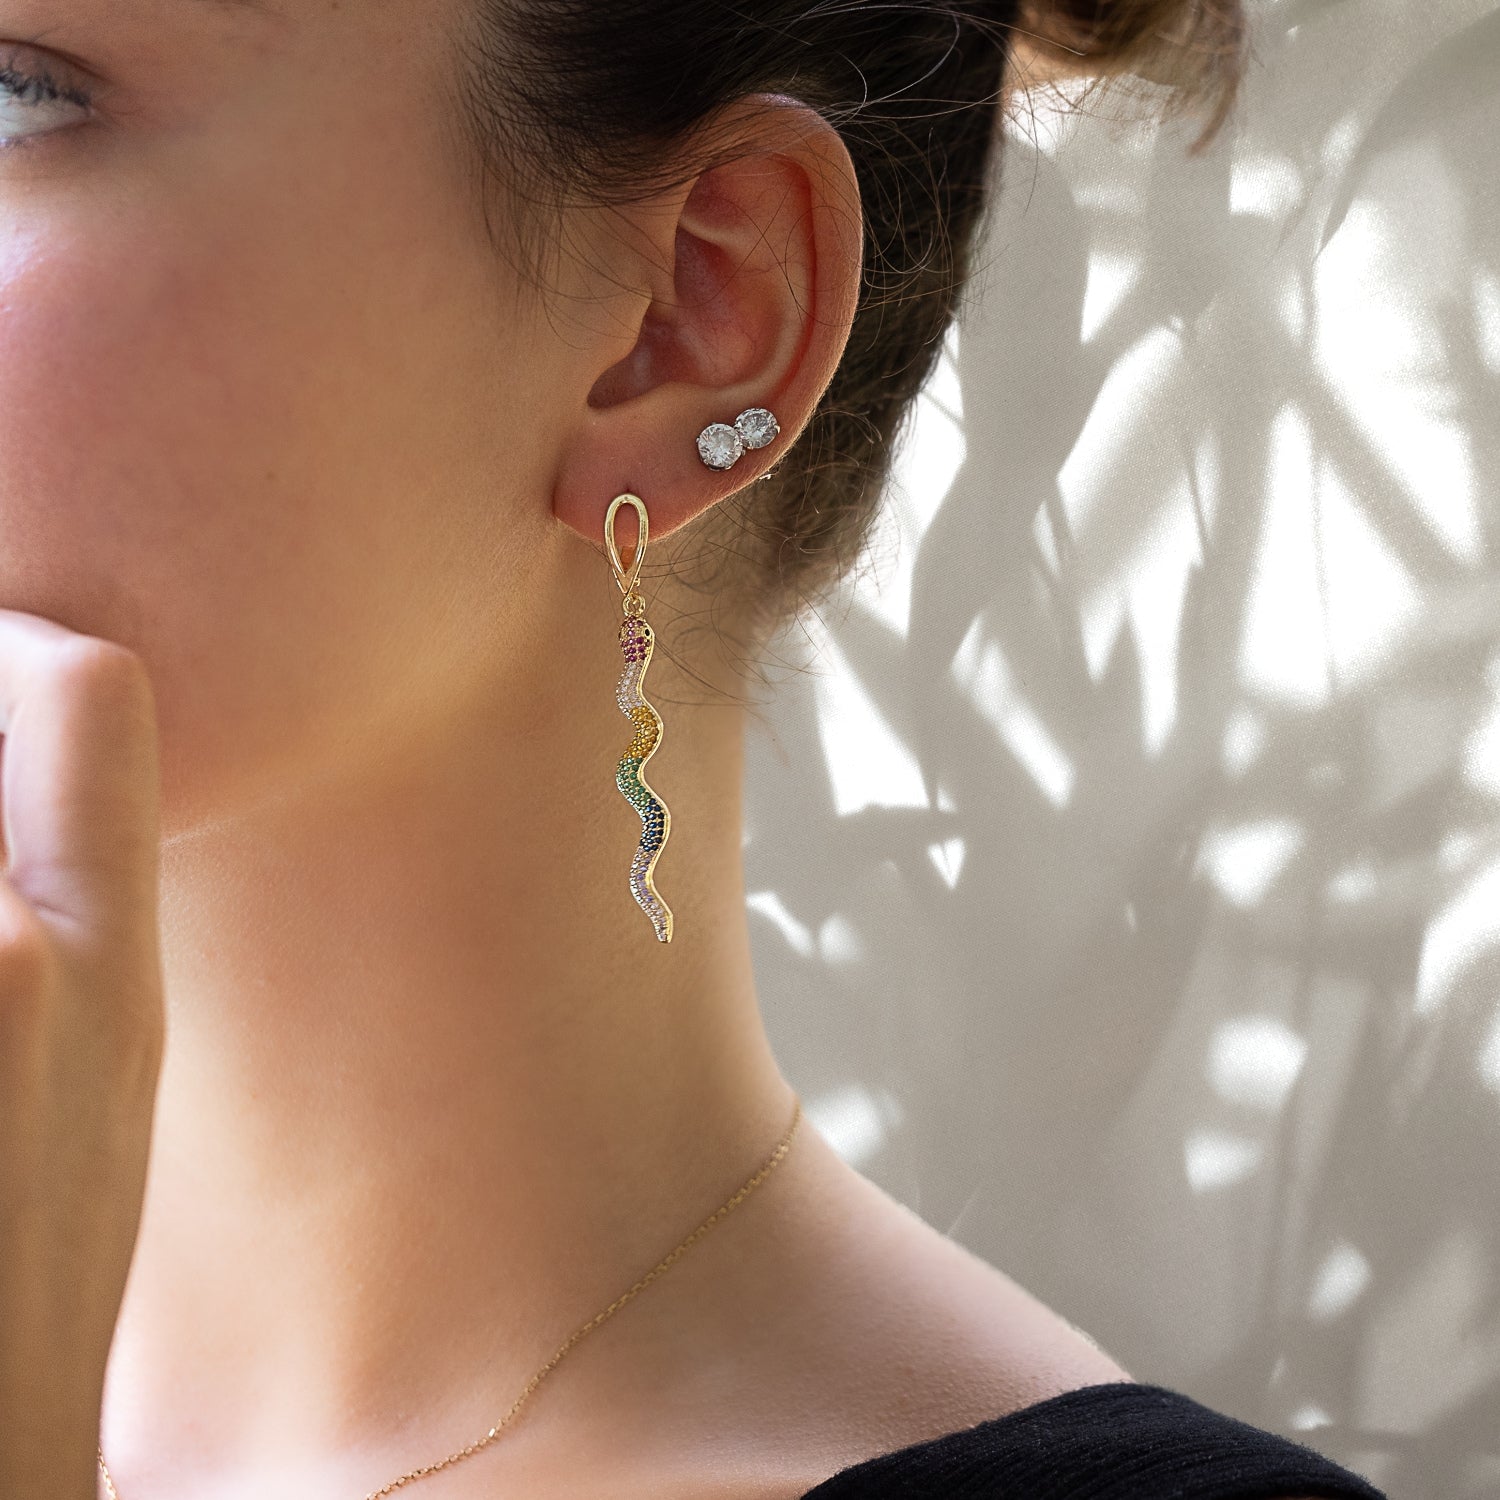 Model wearing the Cheerful Snake Earrings, showcasing their playful and eye-catching design.